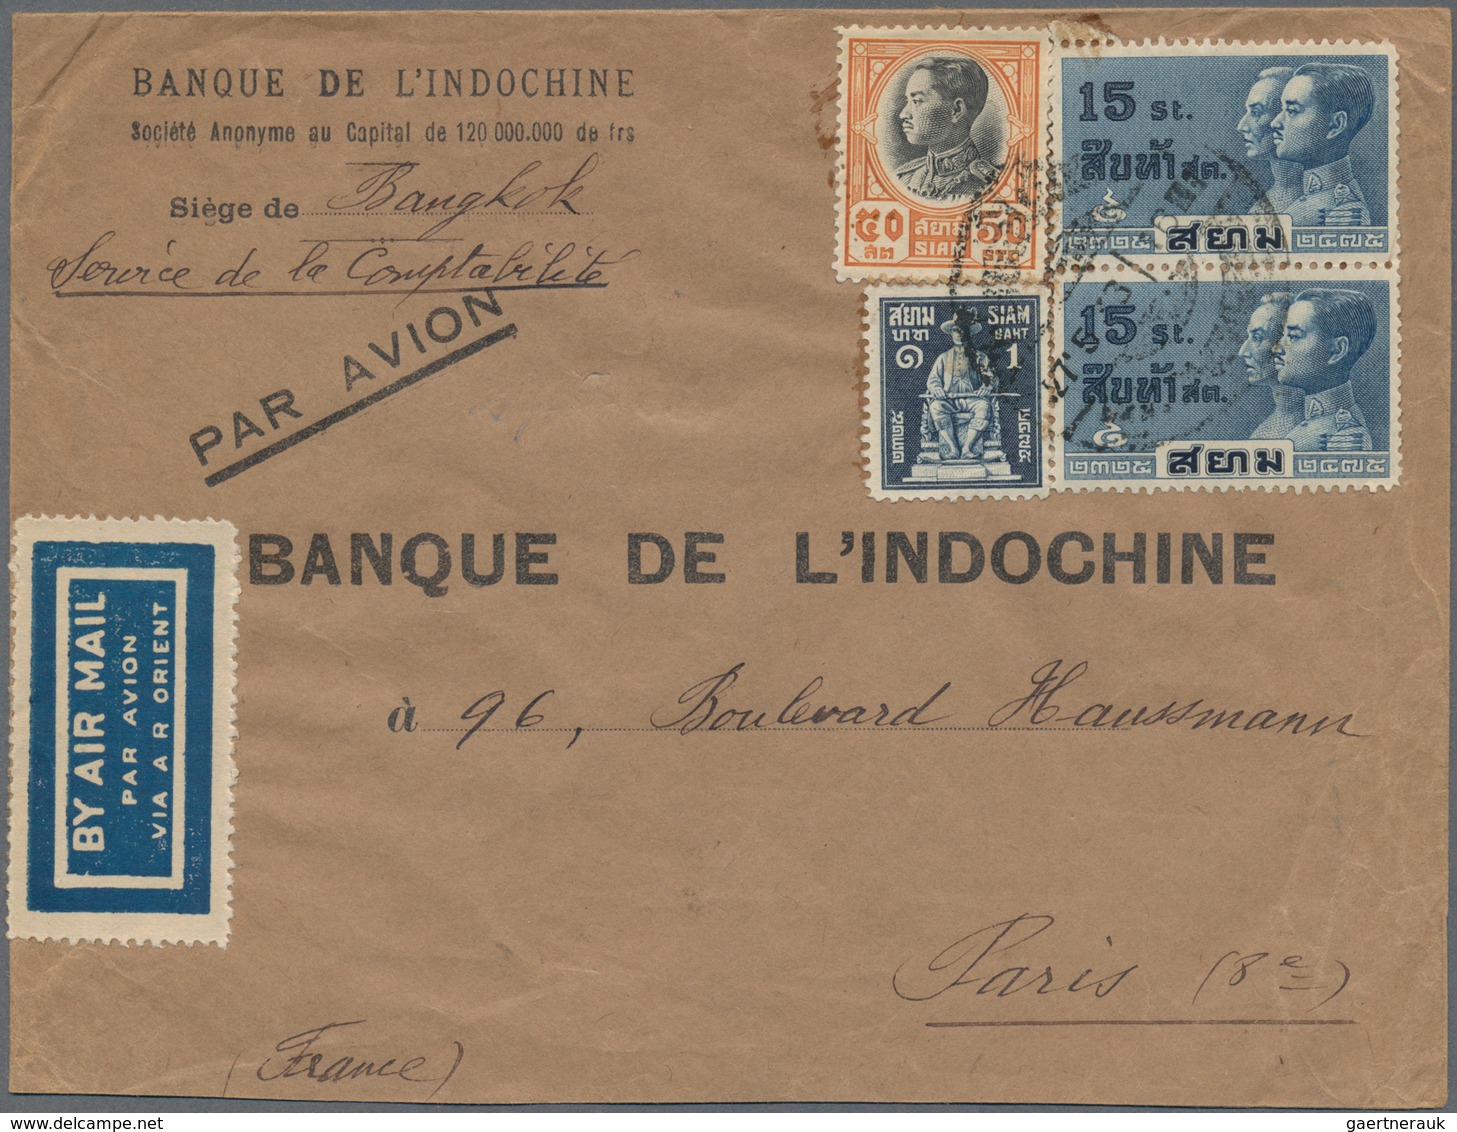 Thailand: 1933 Airmail Cover From Bangkok To The Bank Of Indochina In Paris, Franked 1932 1b. Along - Thailand